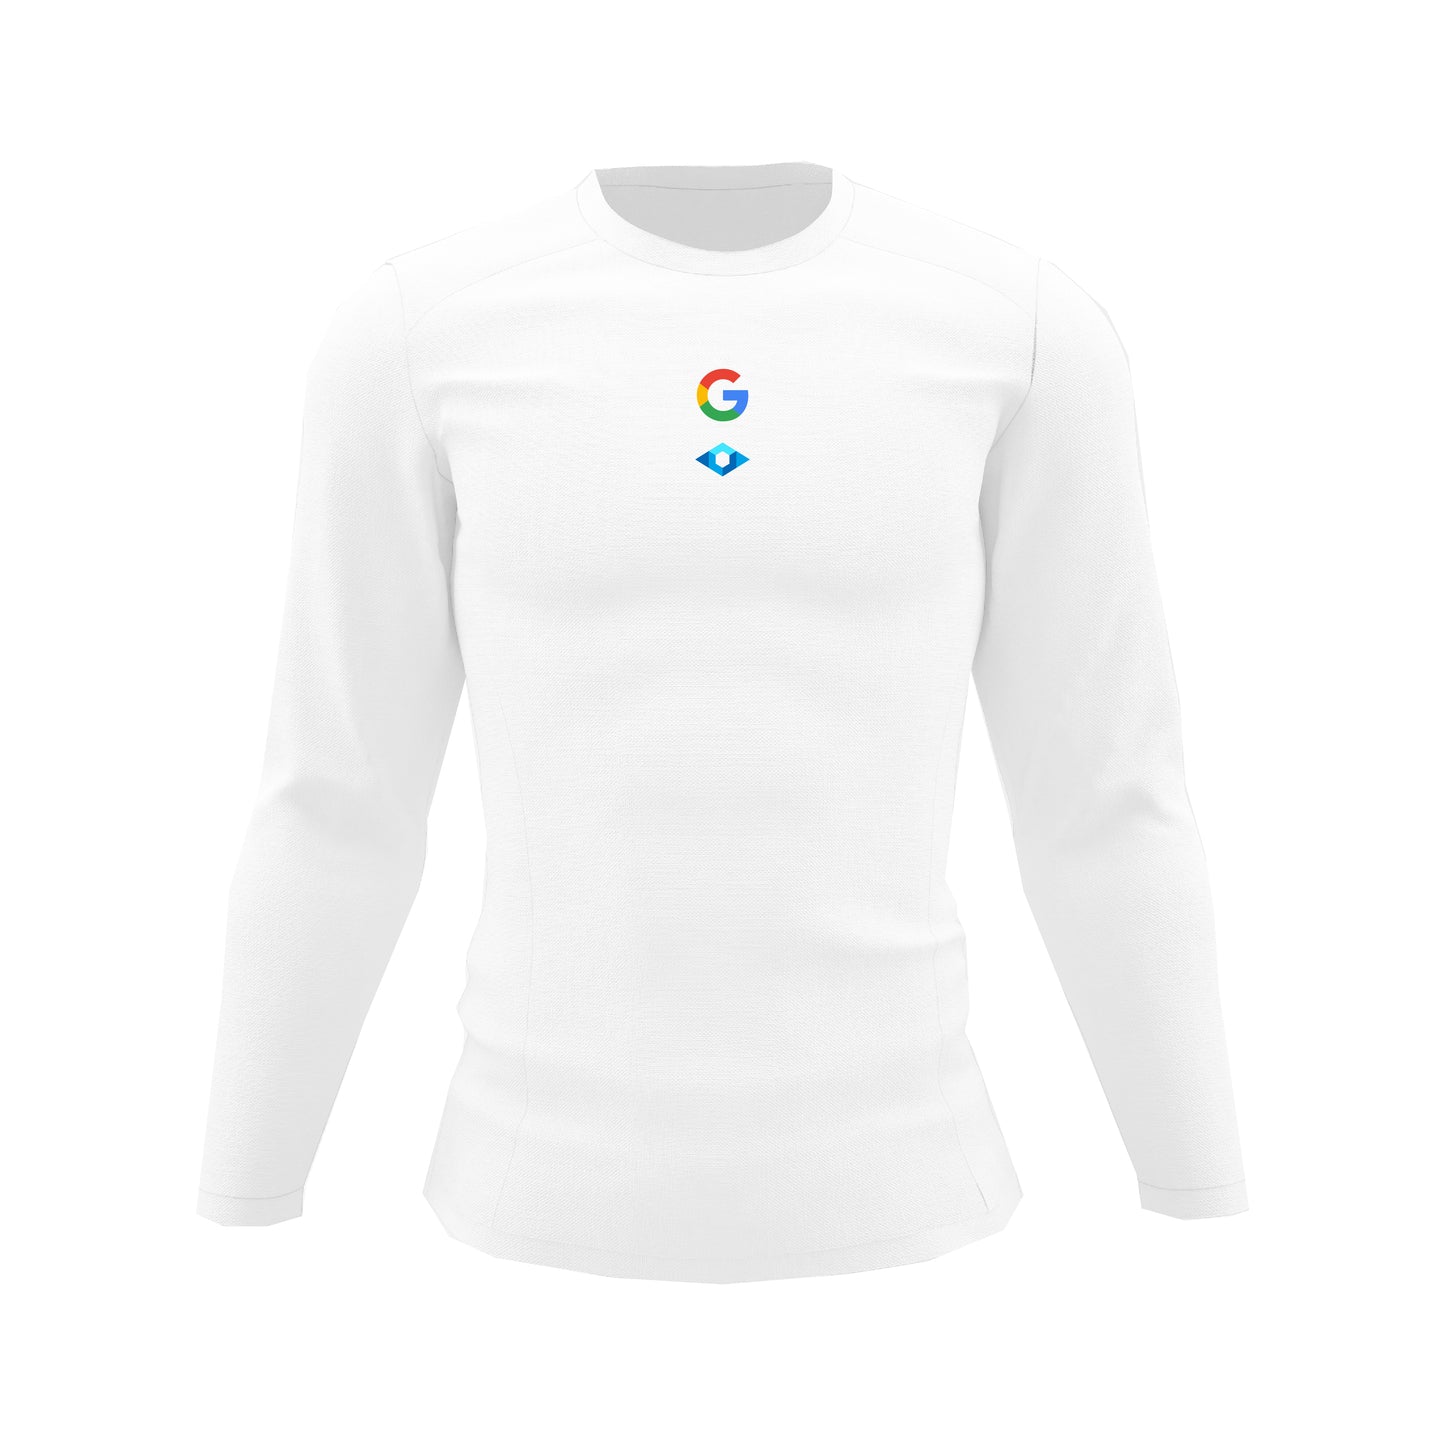 Google - Union of Forces ® Sweatshirt by Athletic Forces -  Model 2